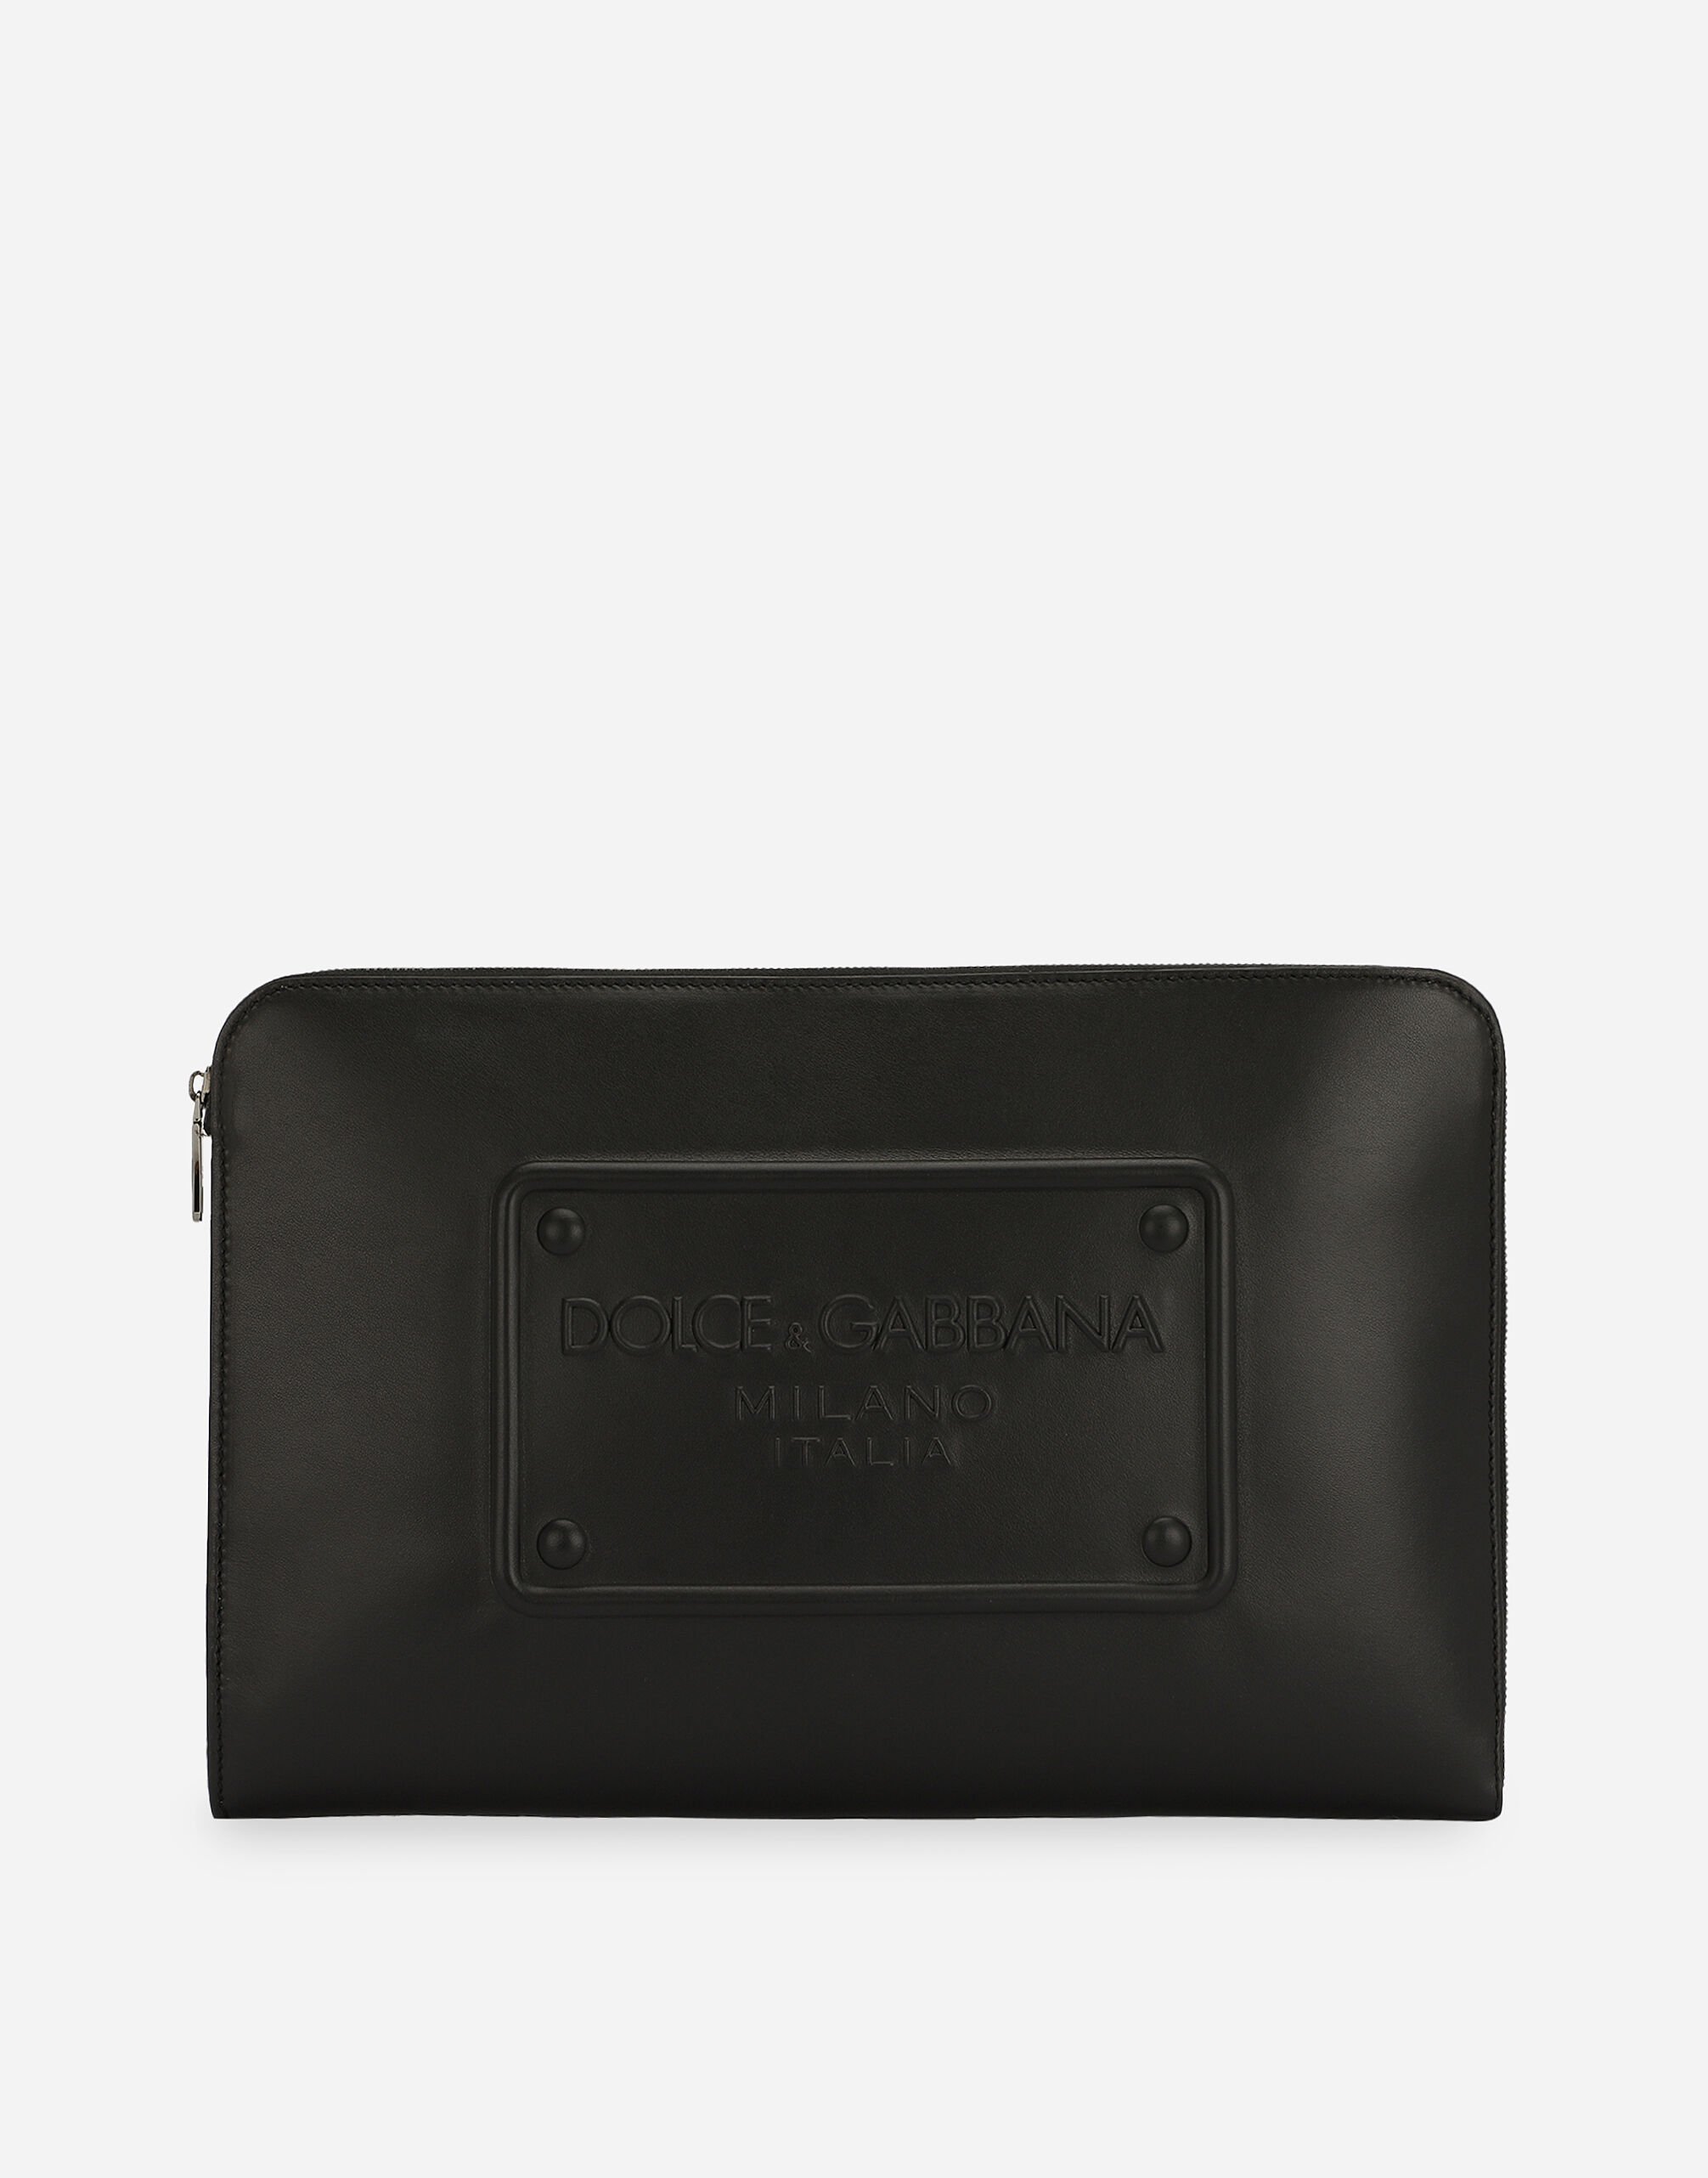 Large calfskin pouch with raised logo